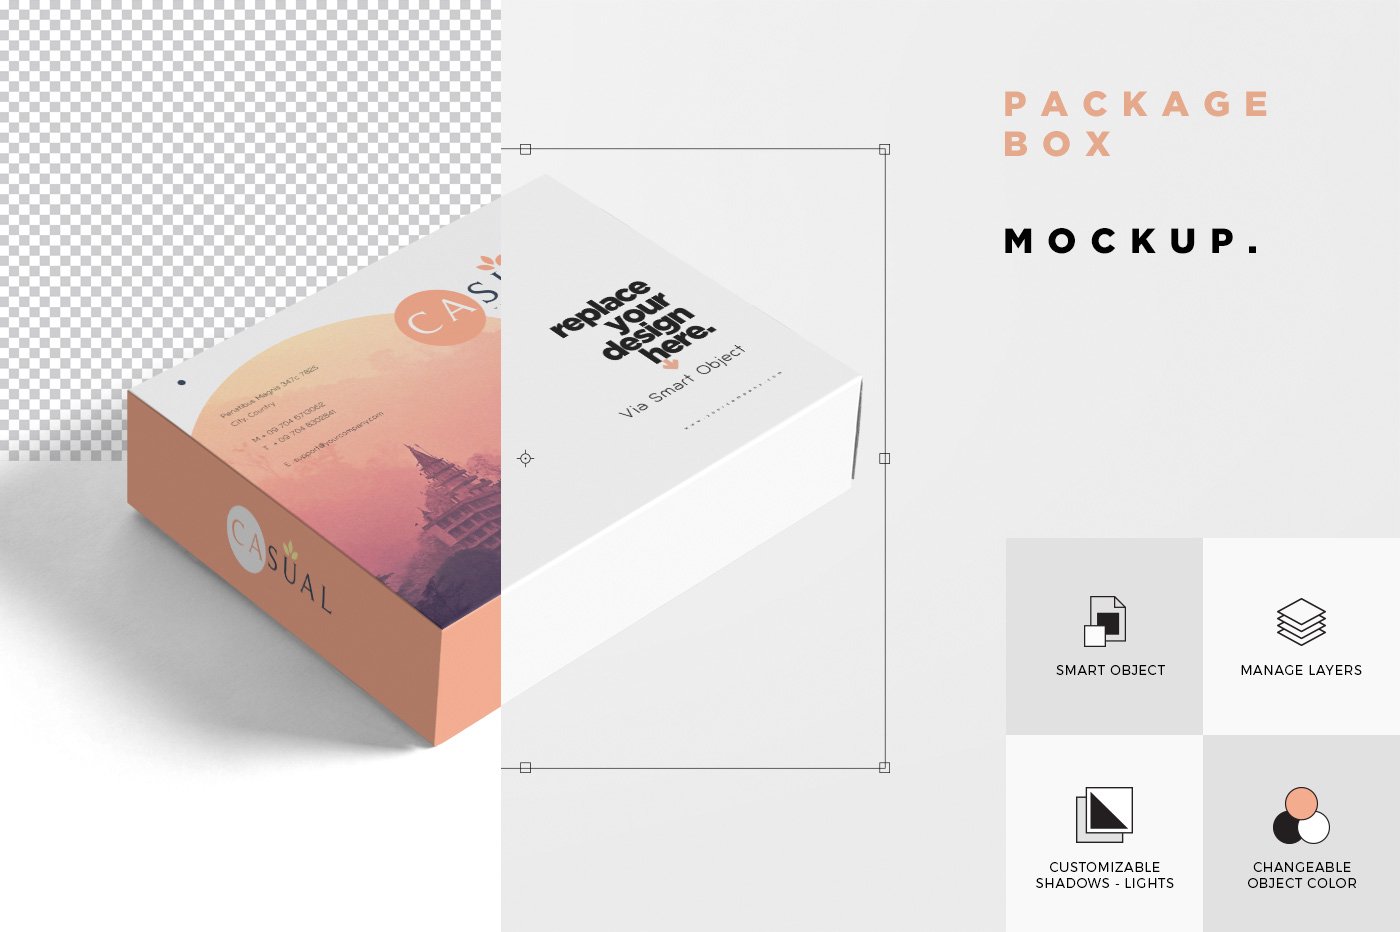 mockup features image 495